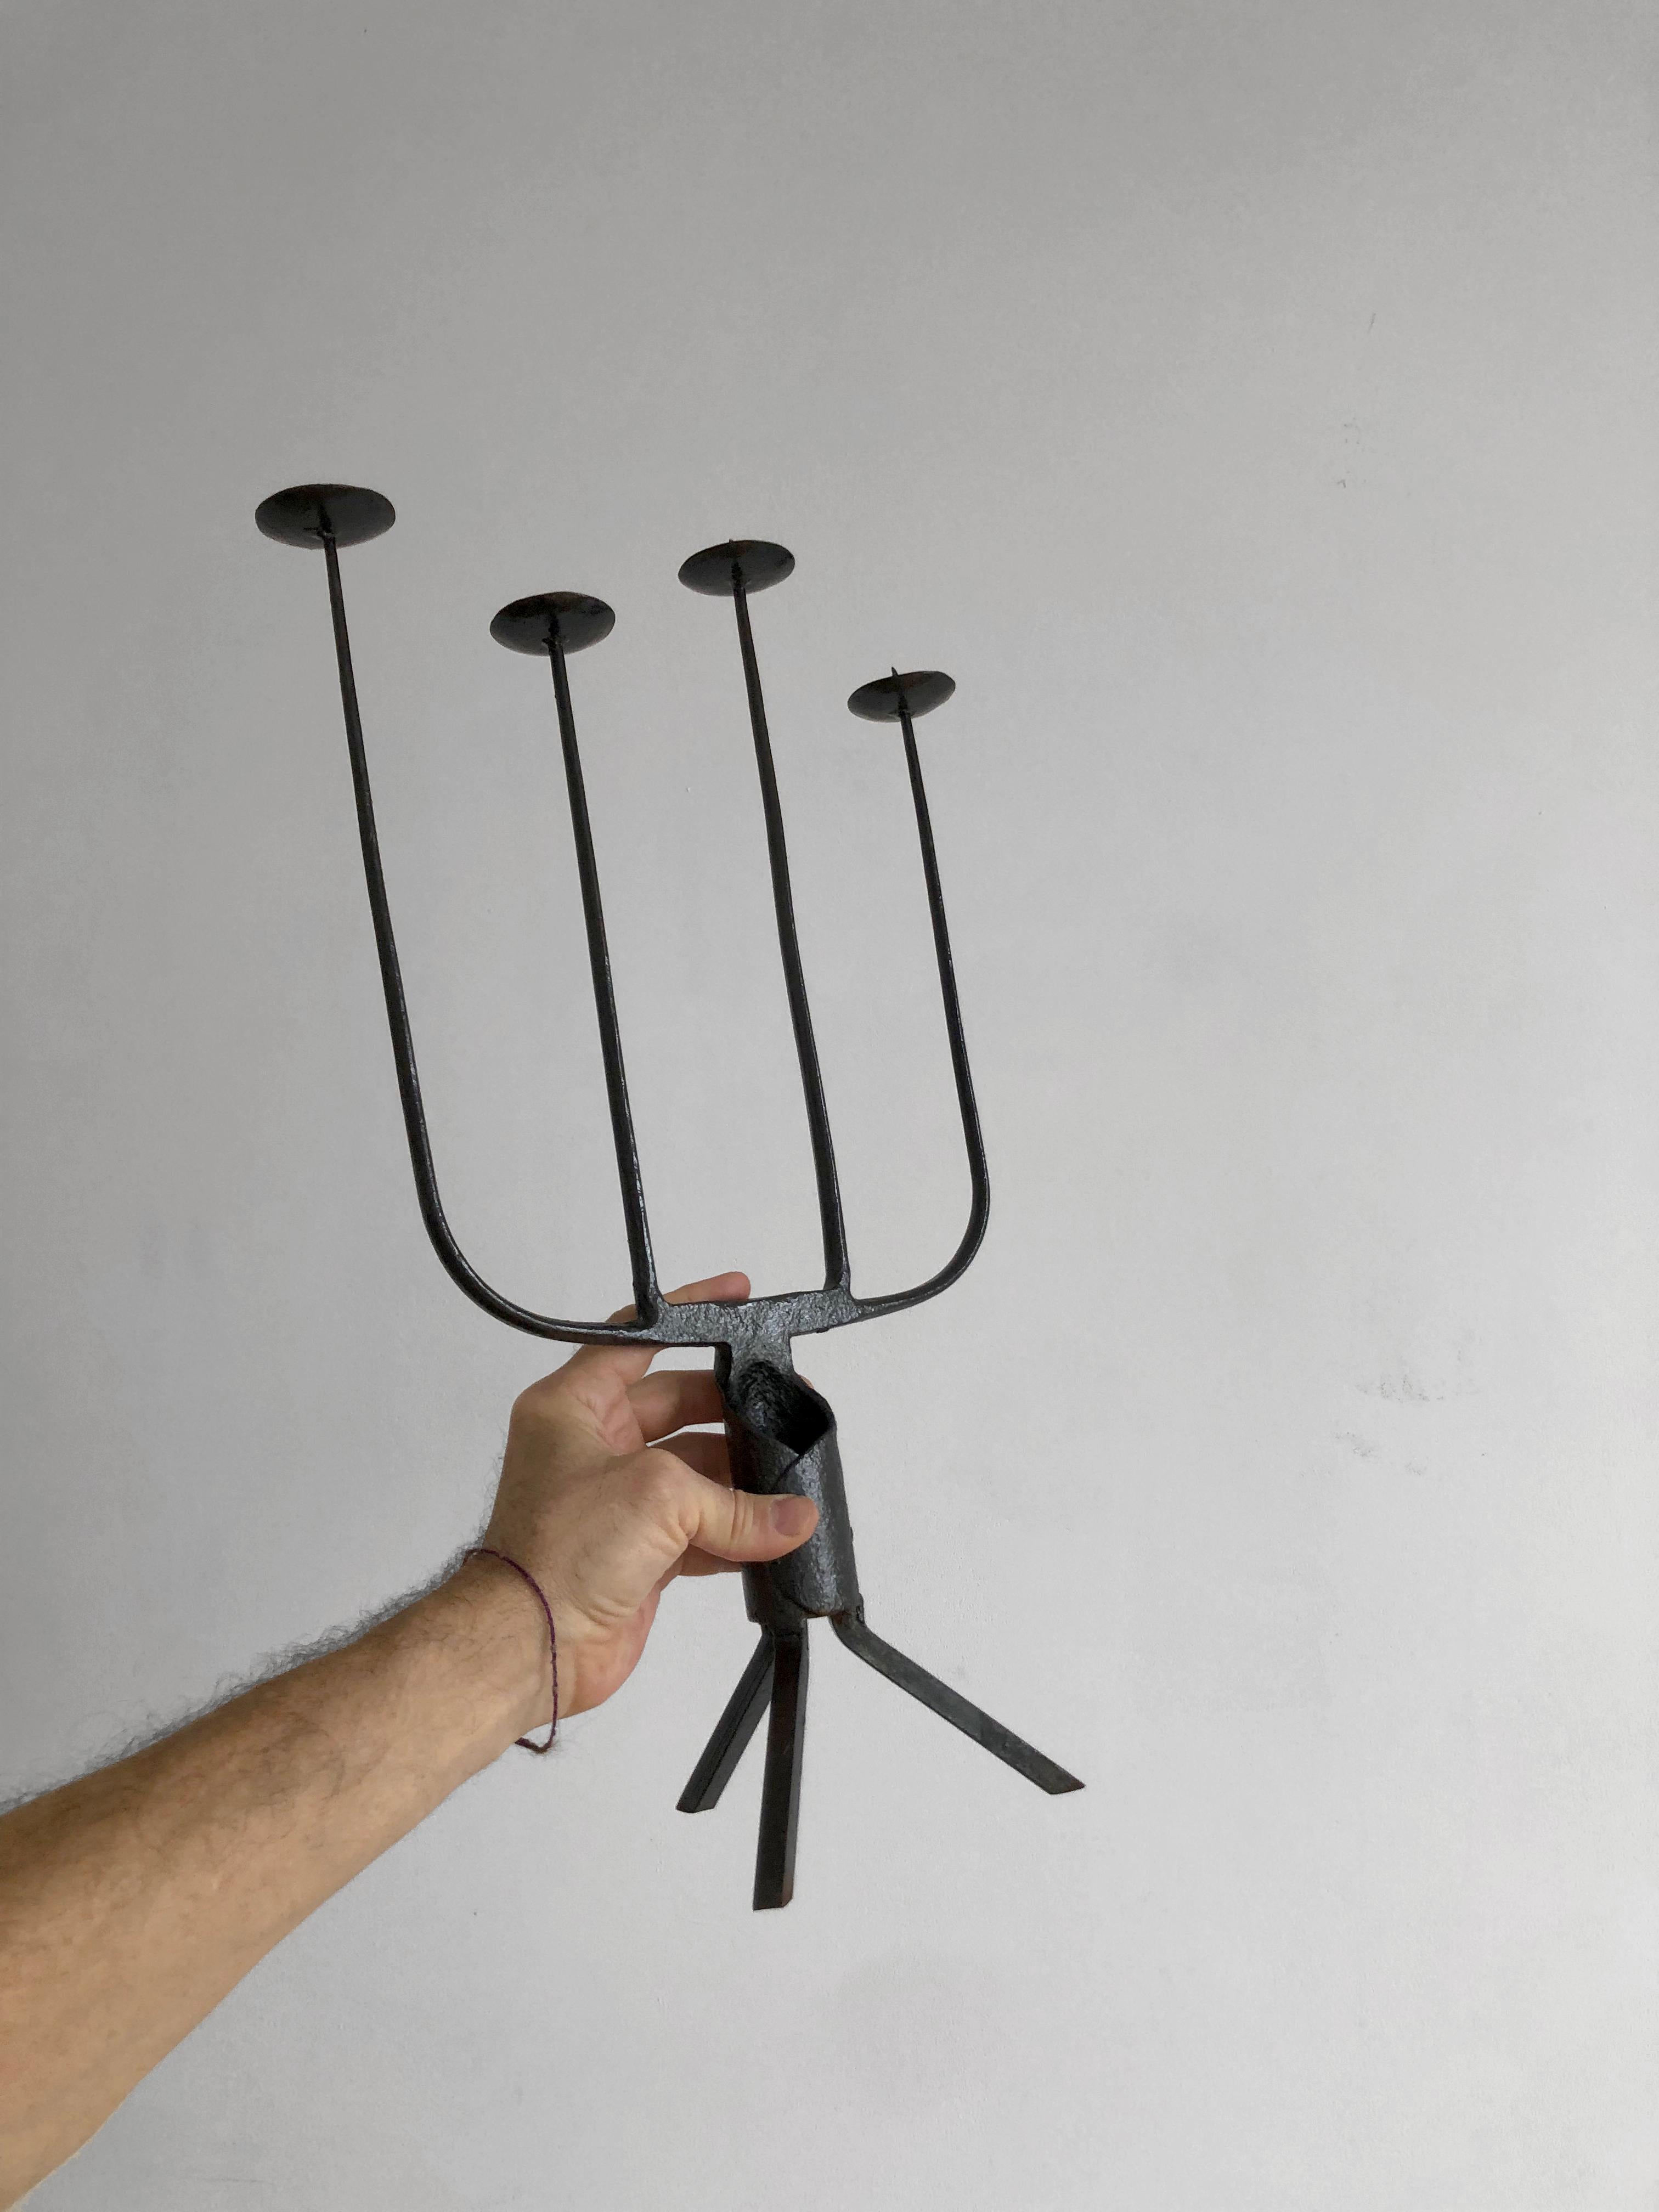 An exceptional sculptural Chandelier, Candelabra, Candlesticks, Candle holder, Brutalist, Rustic Modern, Shabby-Chic,  ,  superb patinated wrought iron structure with 4 long light arms, unique artist piece, to be attributed, France 1950.